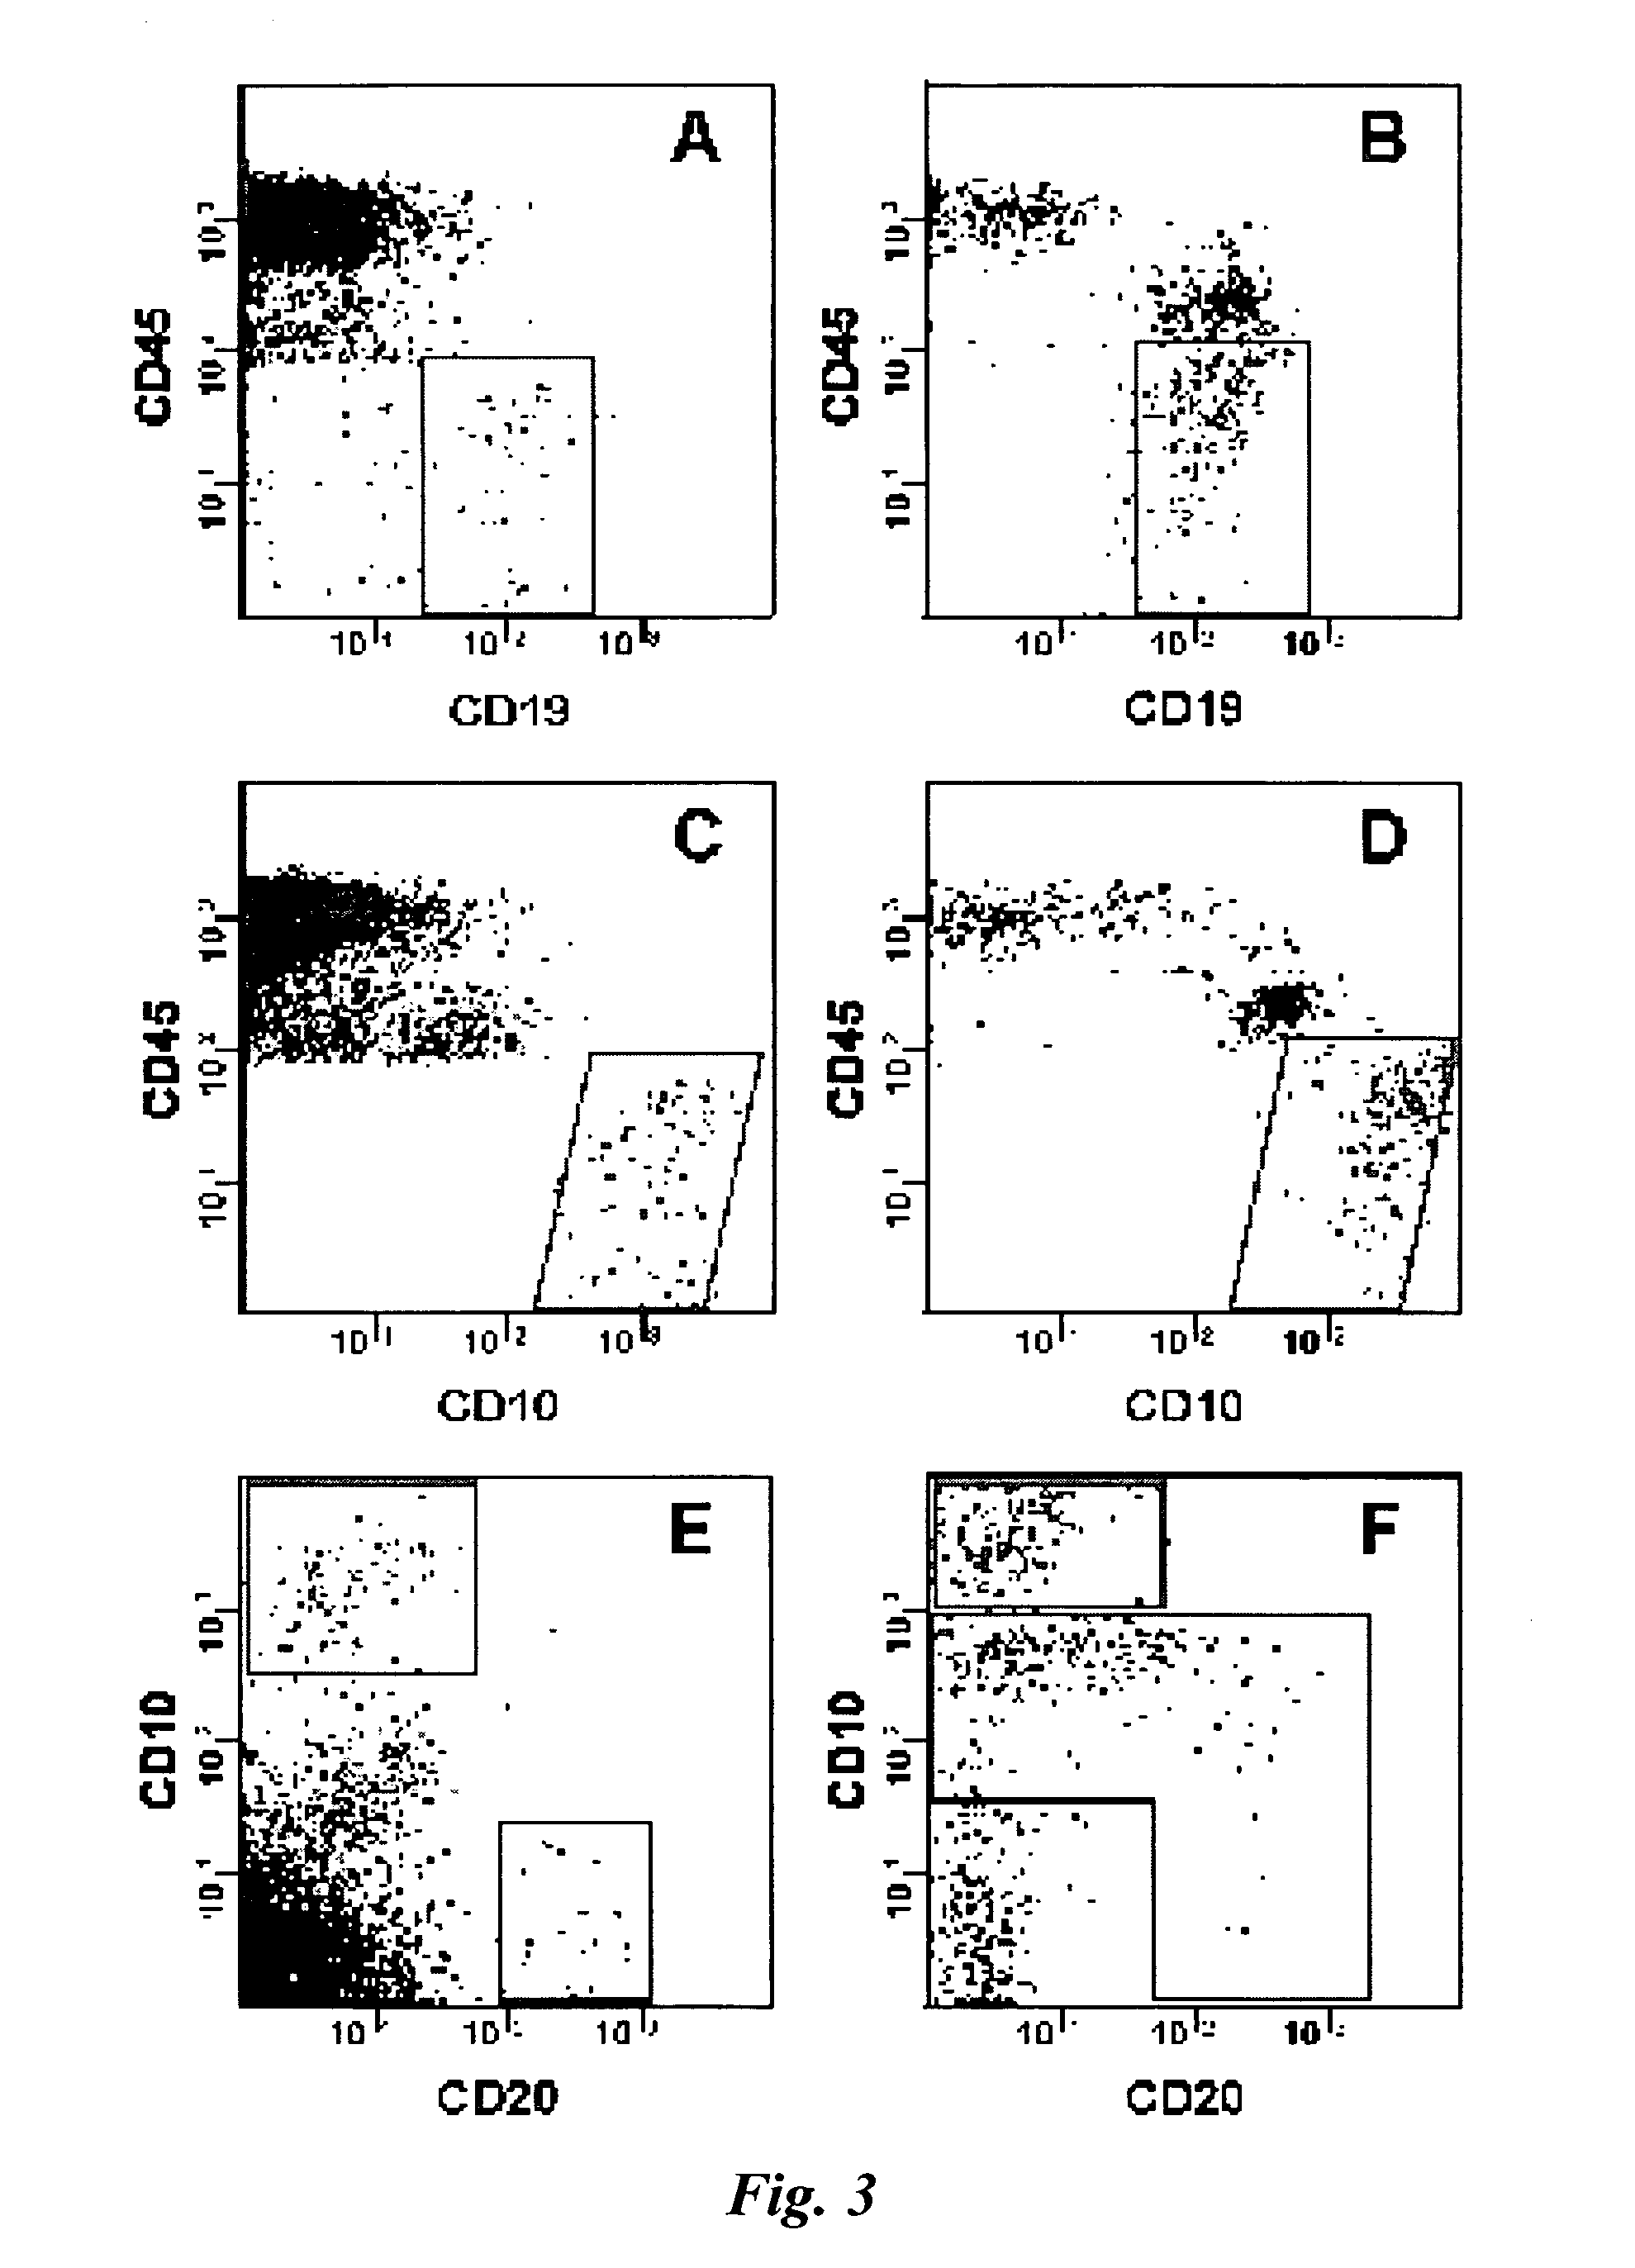 Methods for detecting and confirming minimal disease